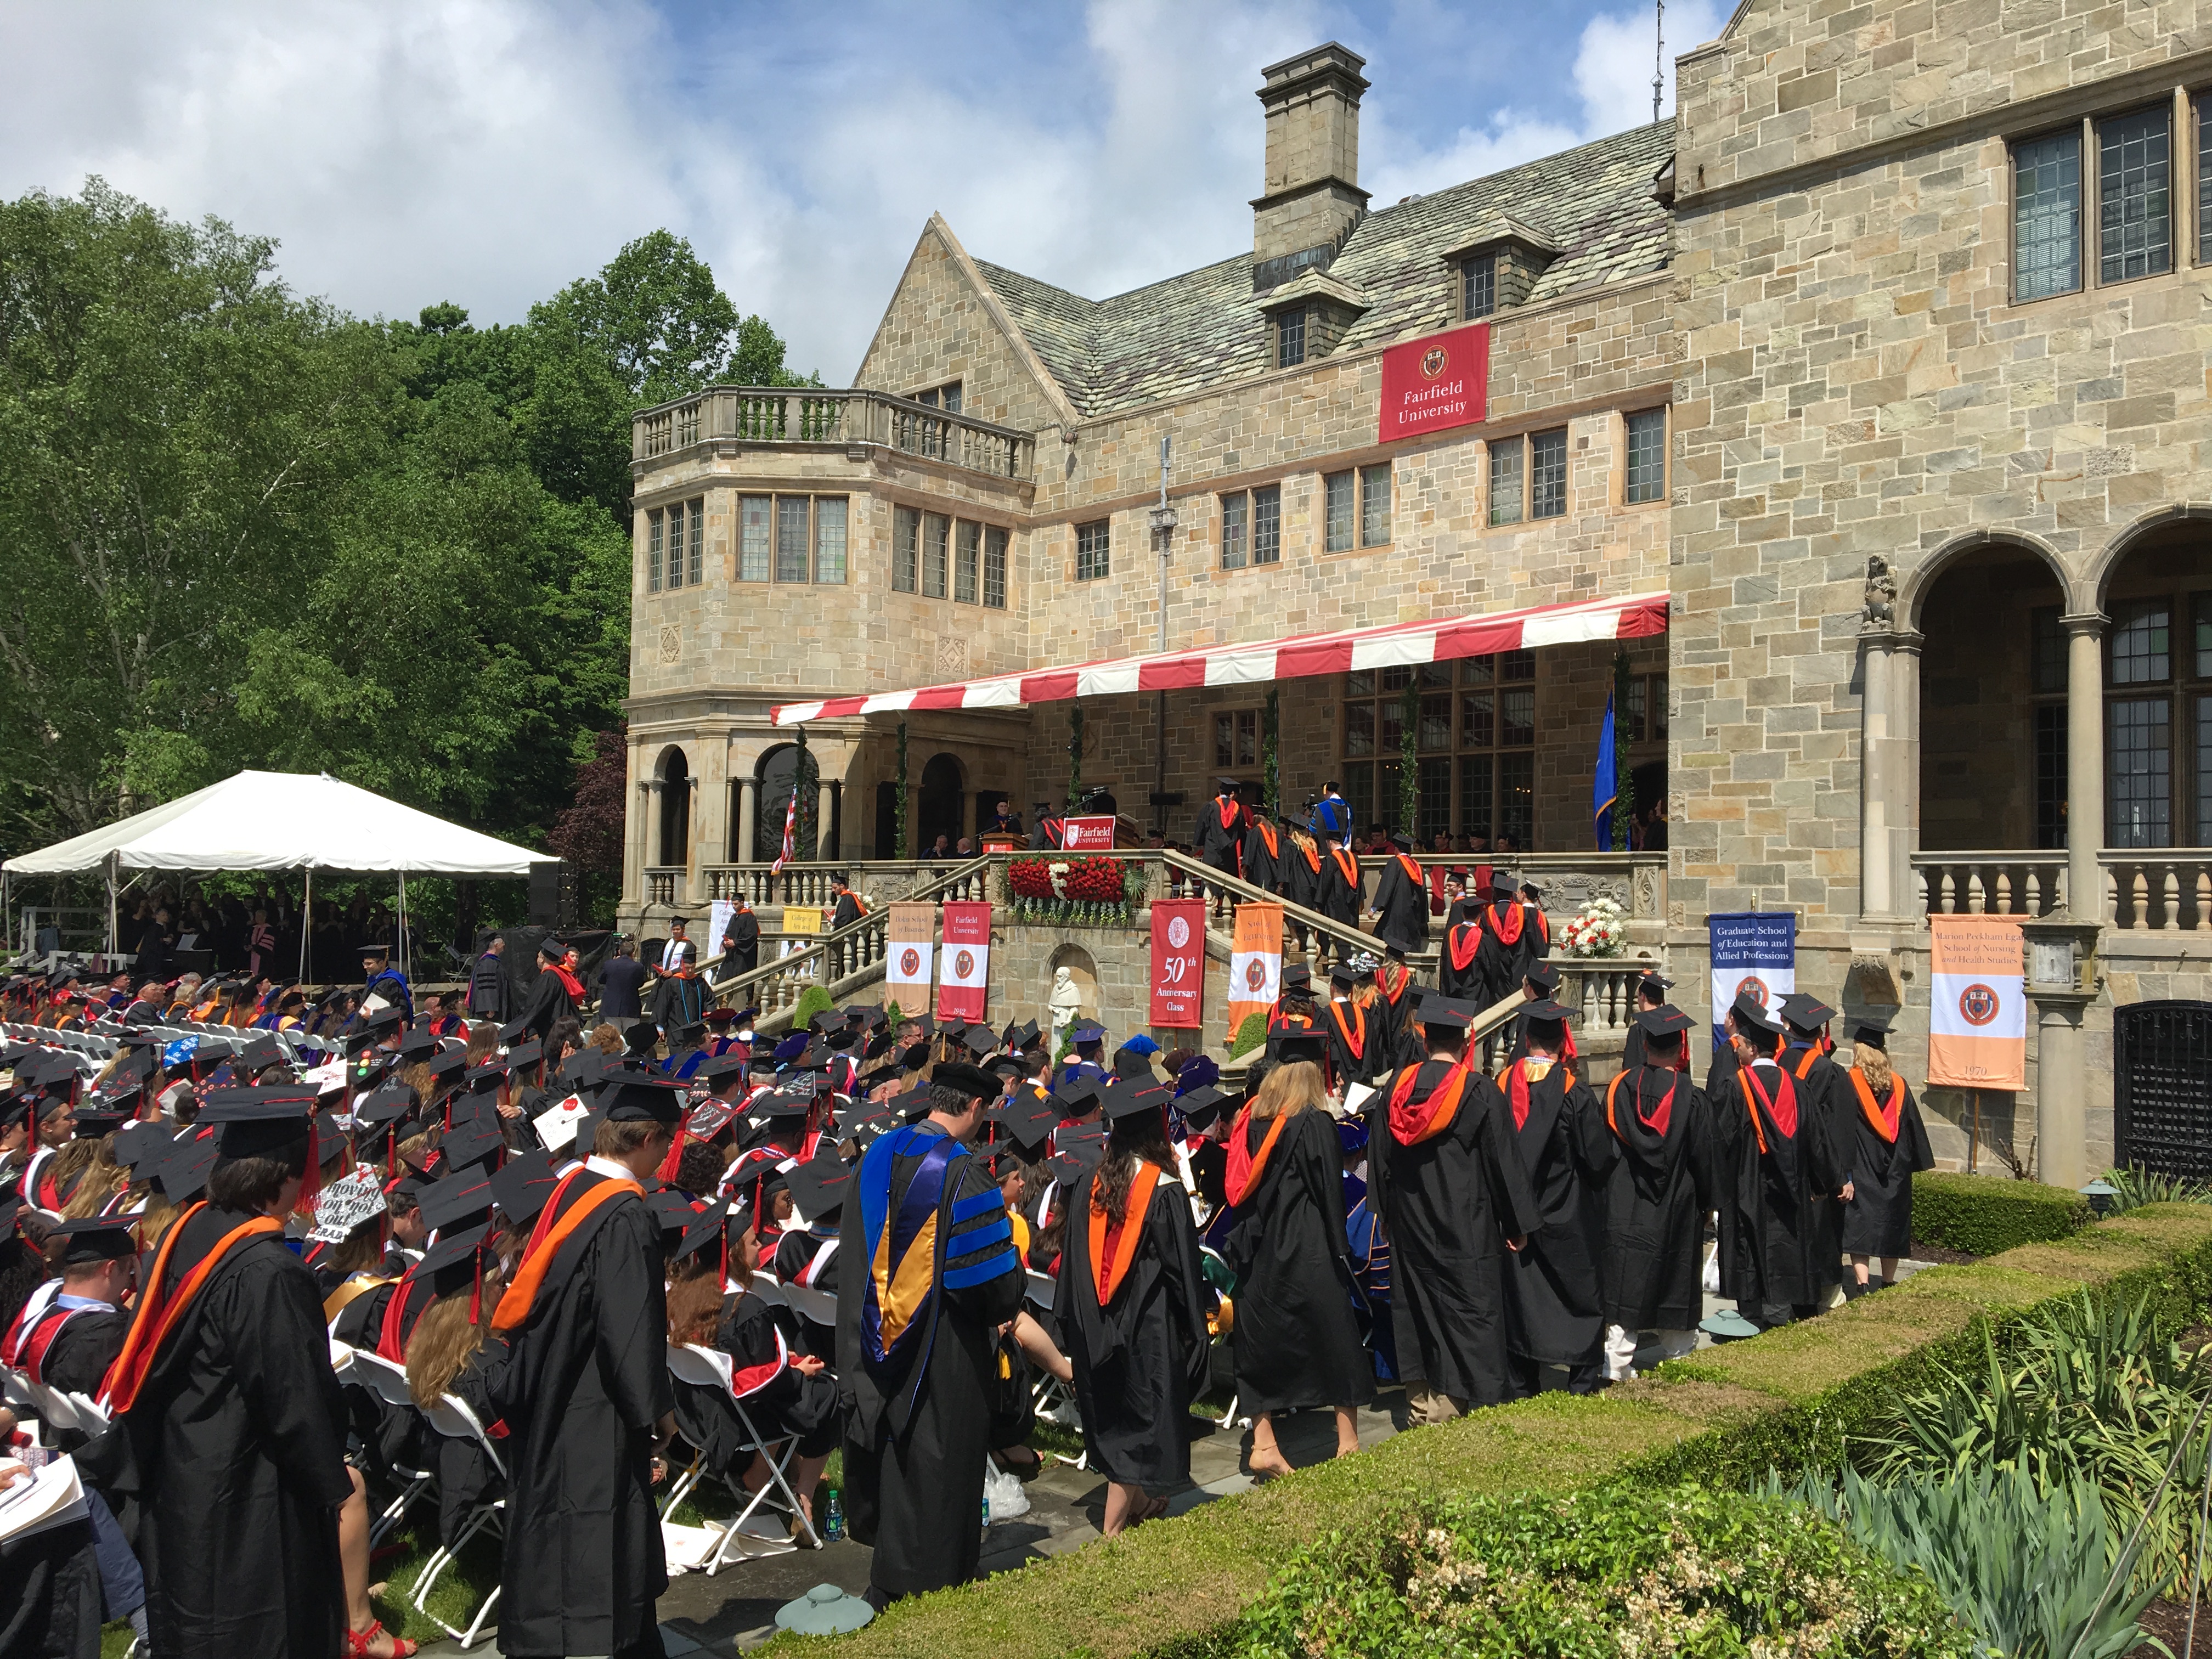 Sun Shines on Fairfield University's 68th Commencement Ceremony The